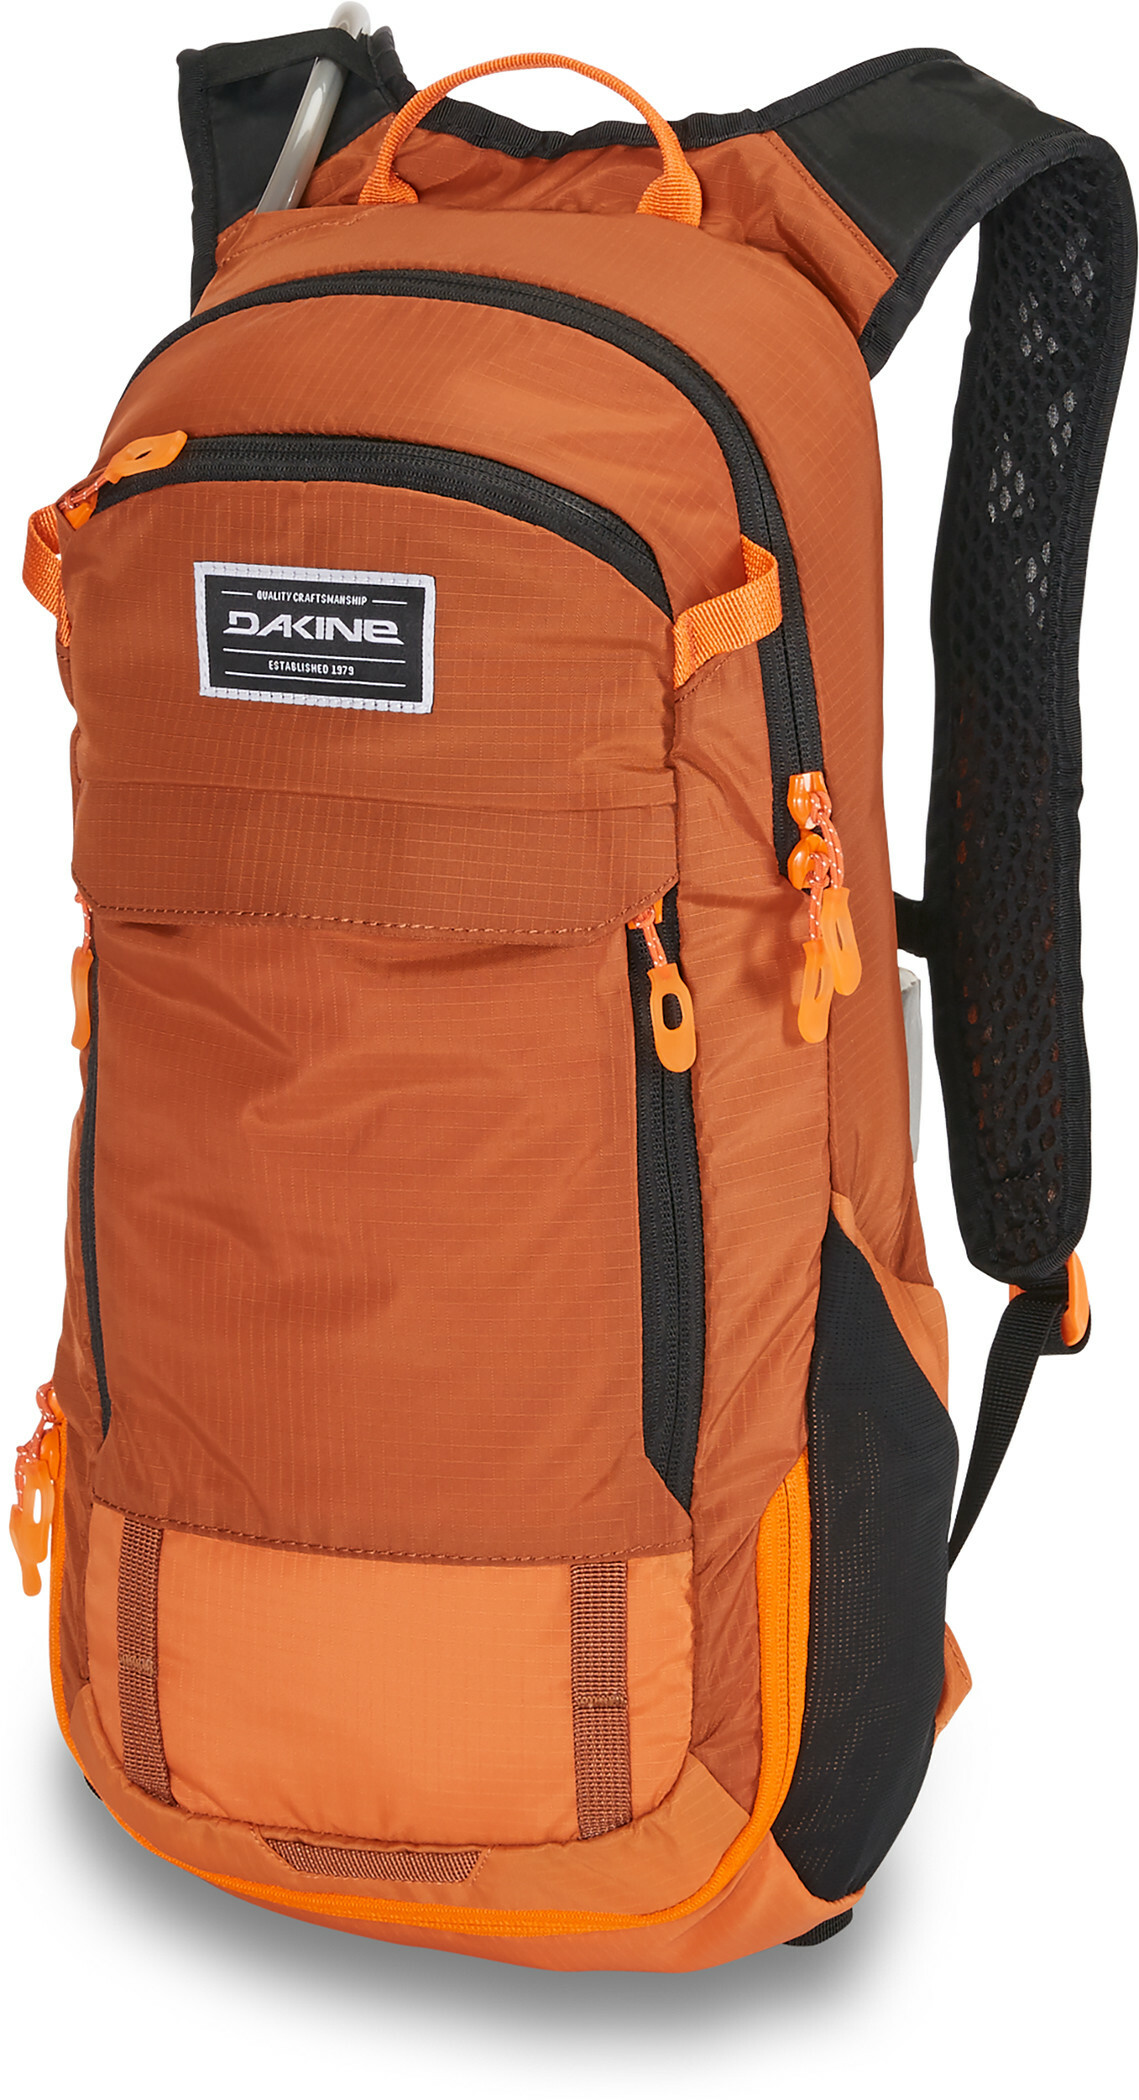 Syncline 12L Bike Hydration Backpack